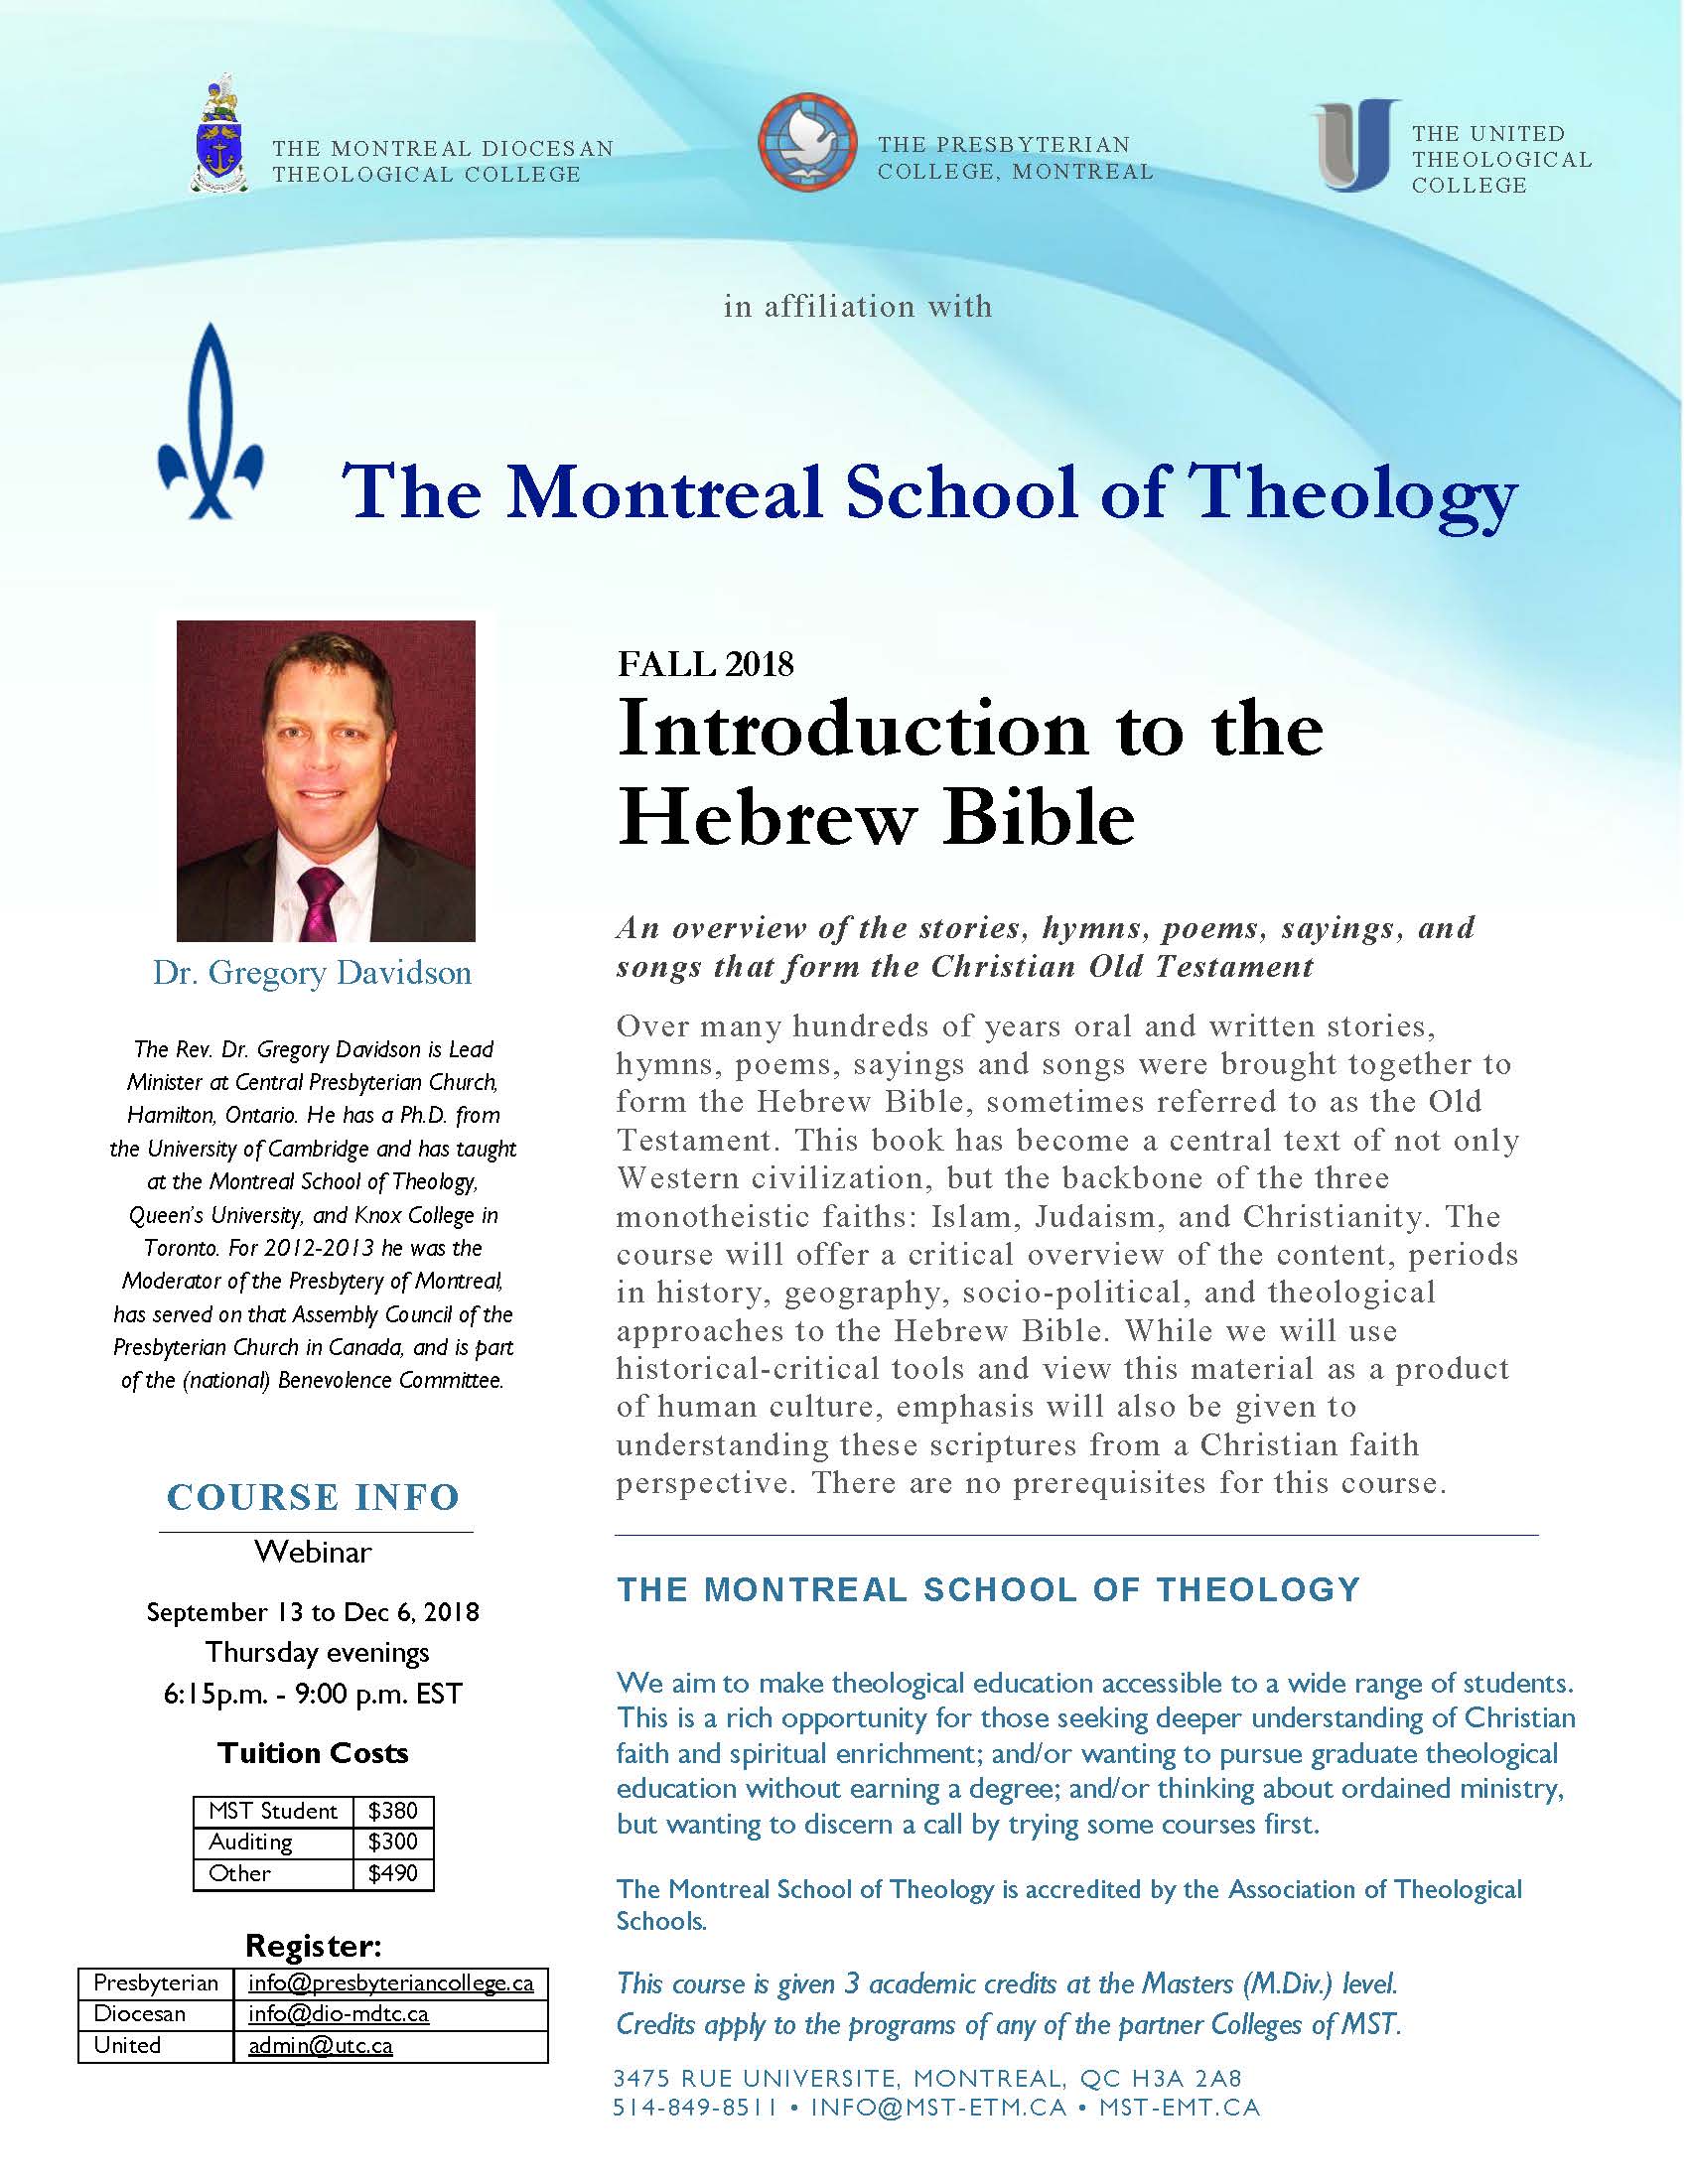 Fall 2018 Online Course: Introduction to the Hebrew Bible